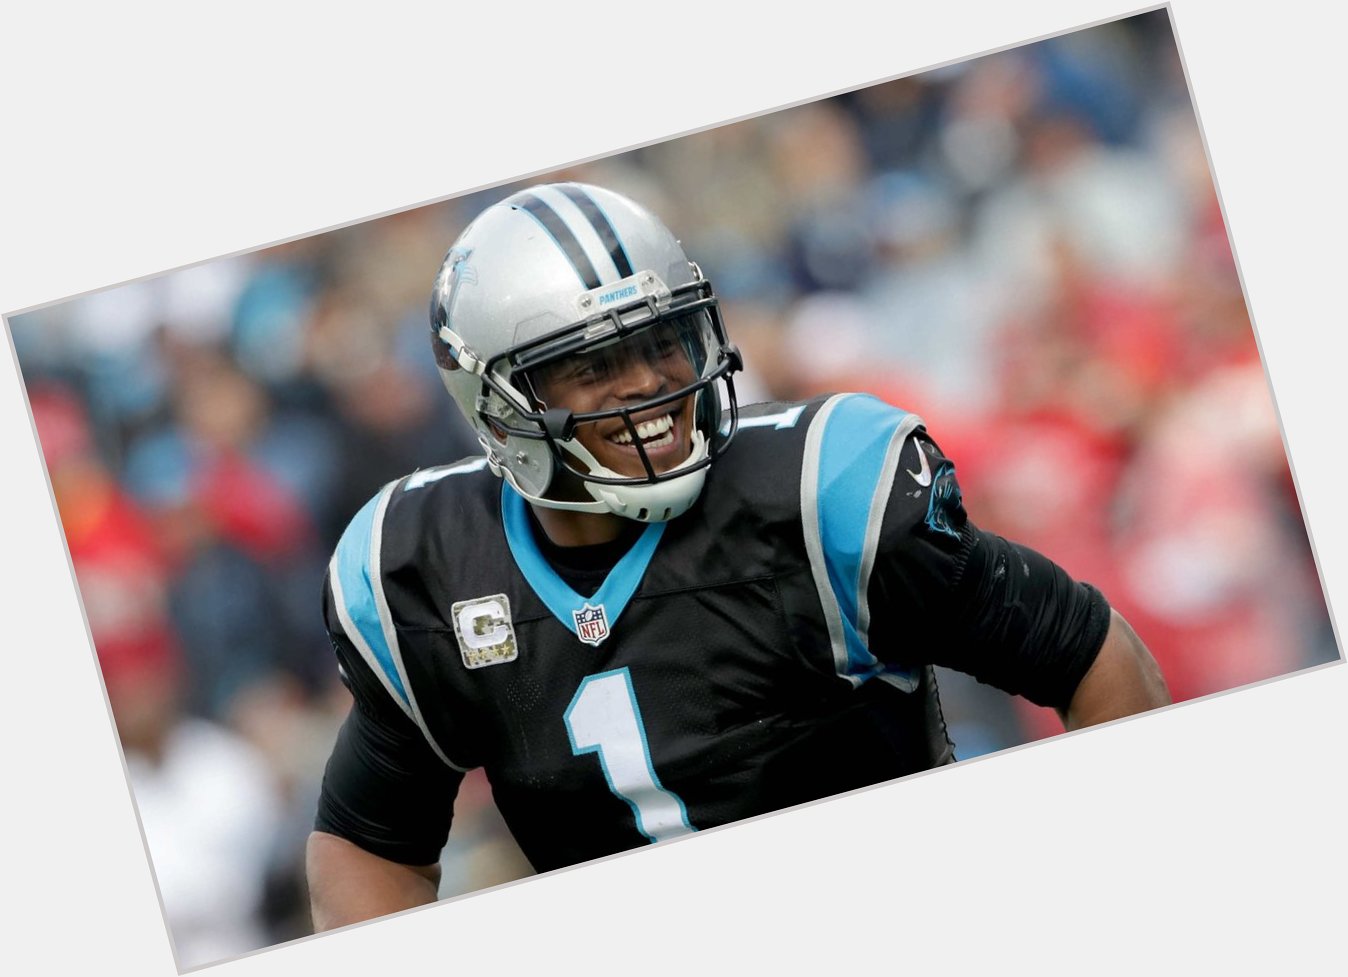 Watch: You can\t unsee Cam Newton\s happy birthday to himself on Instagram  